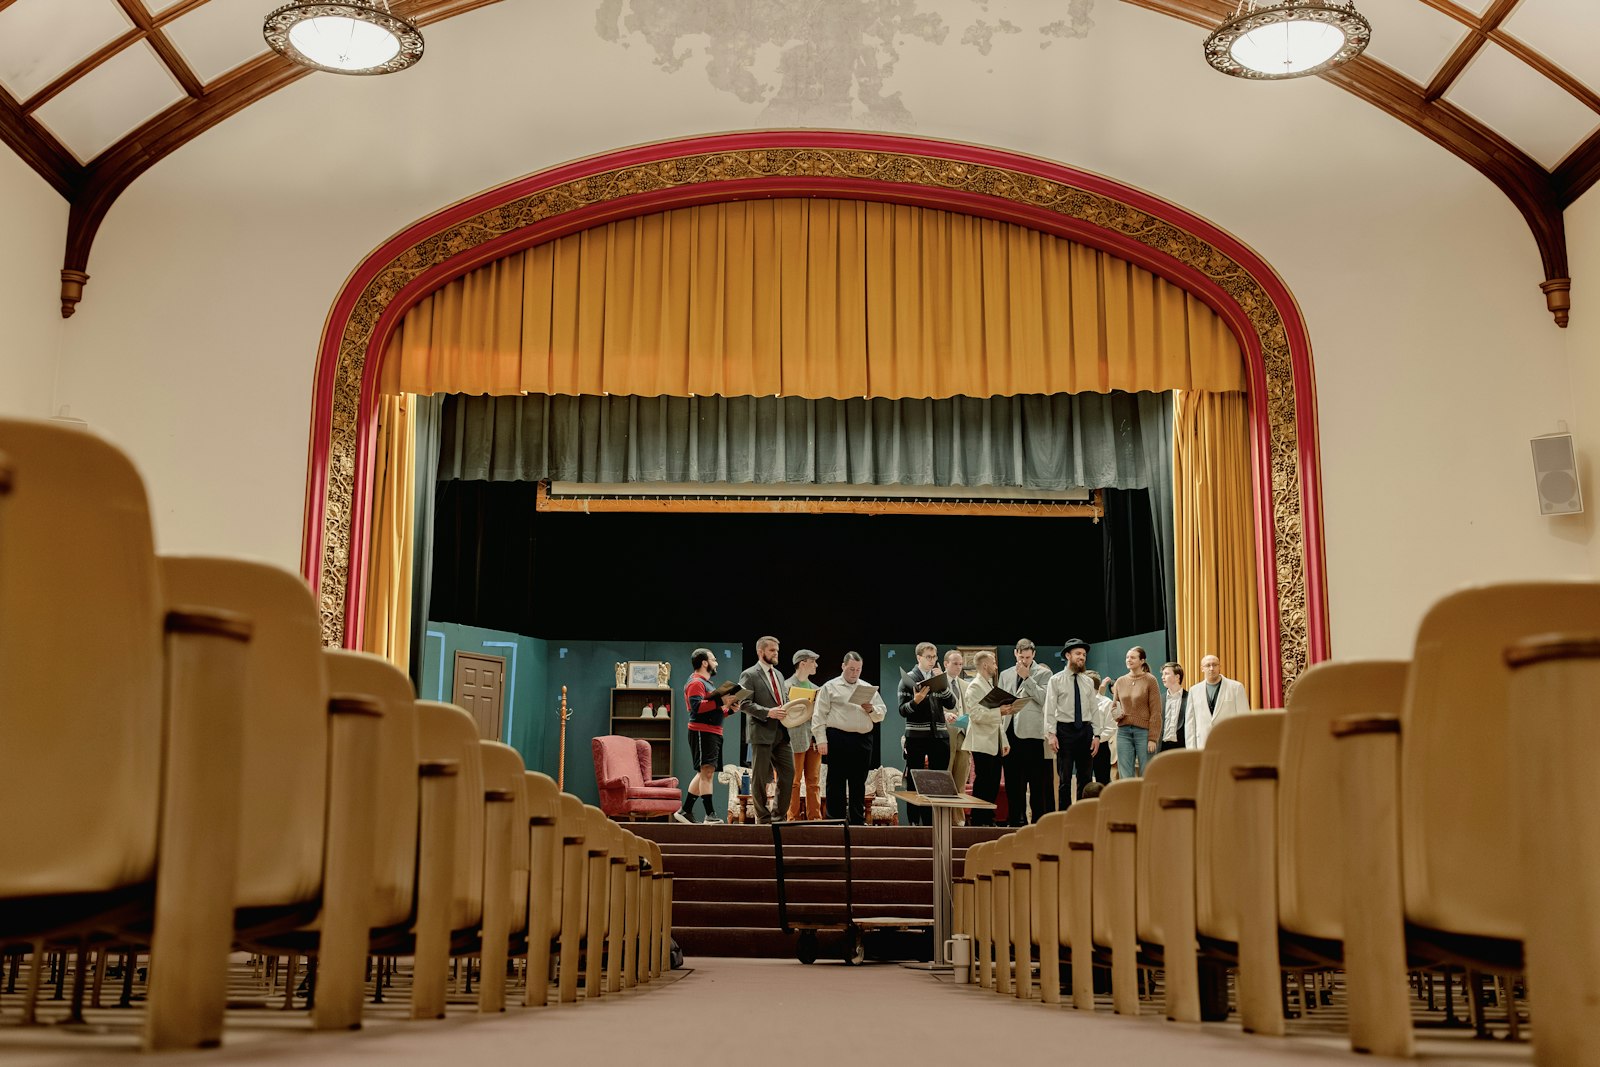 All are invited to attend the world premiere of Deacon Caraher's musical, "The Bluff," on March 22 and 23 at 7 p.m. A free-will offering will be accepted, but not required.